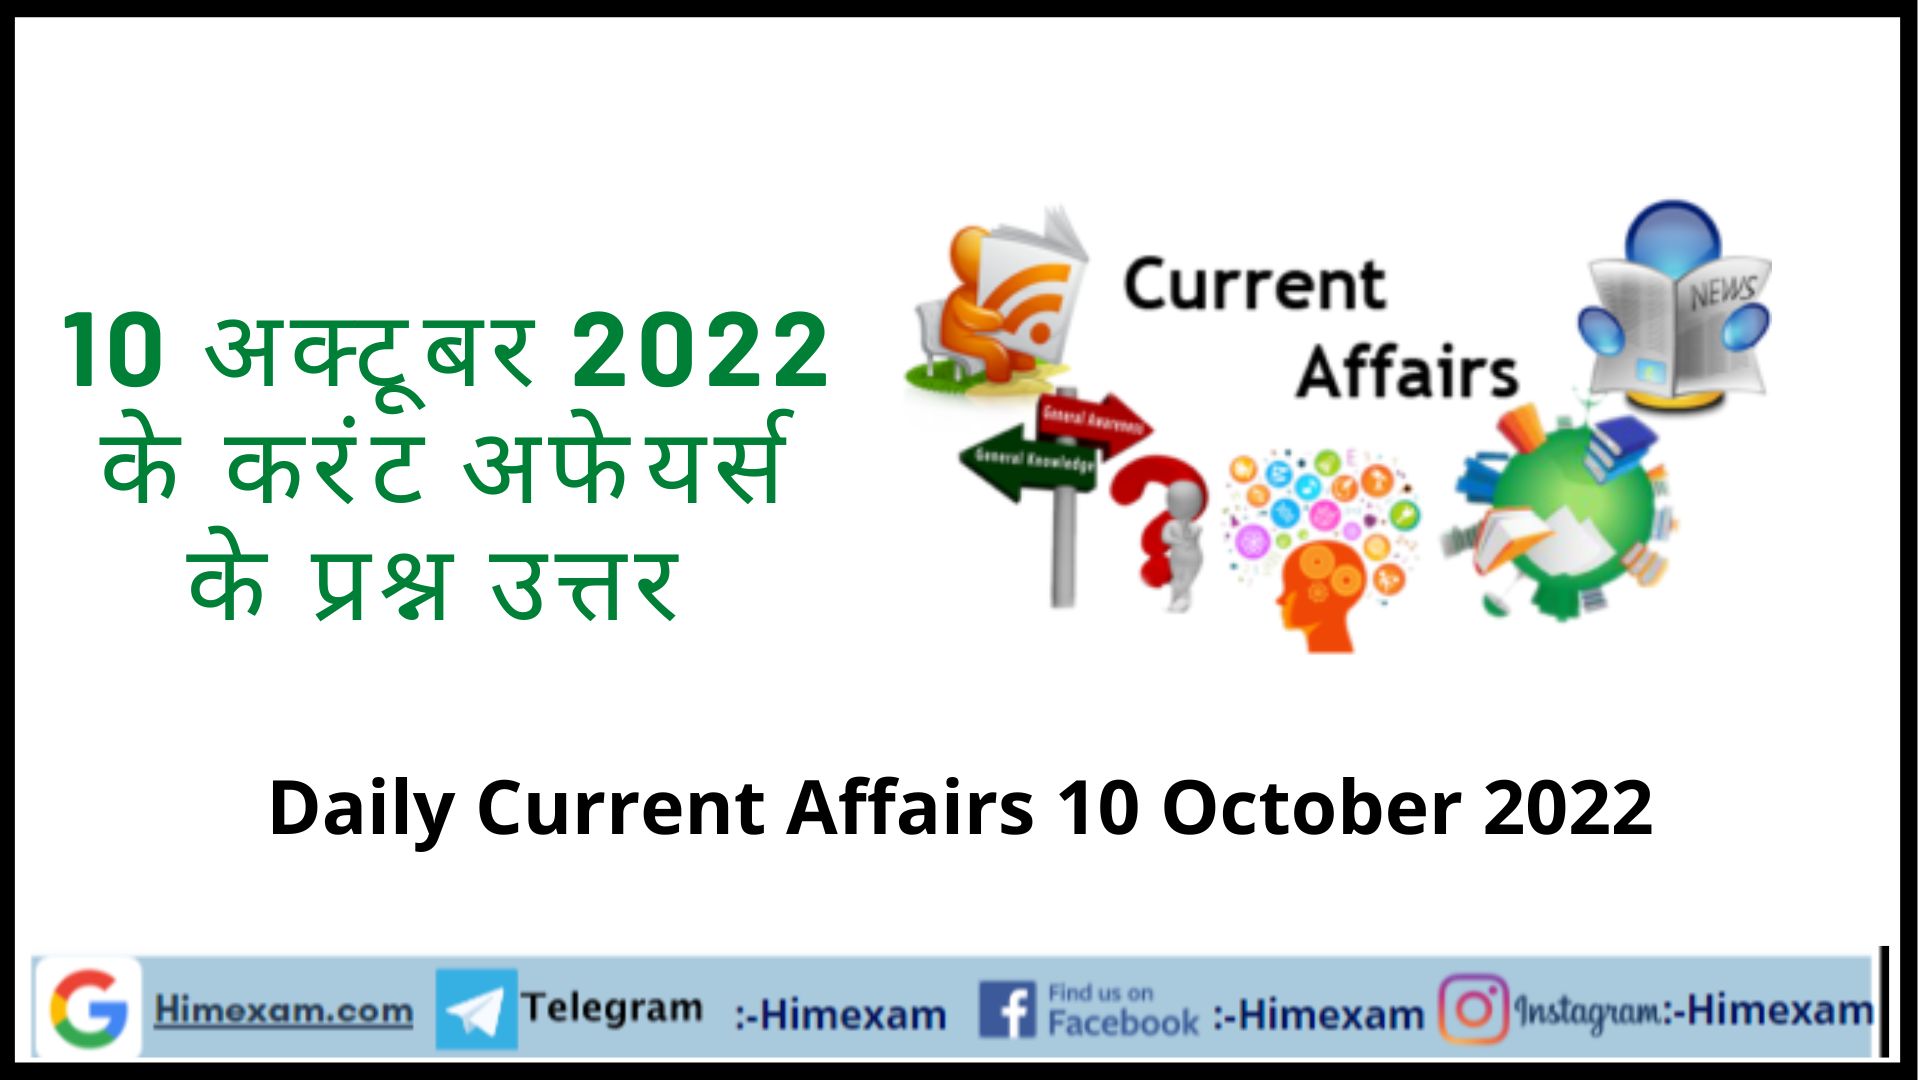 Daily Current Affairs 10 October 2022